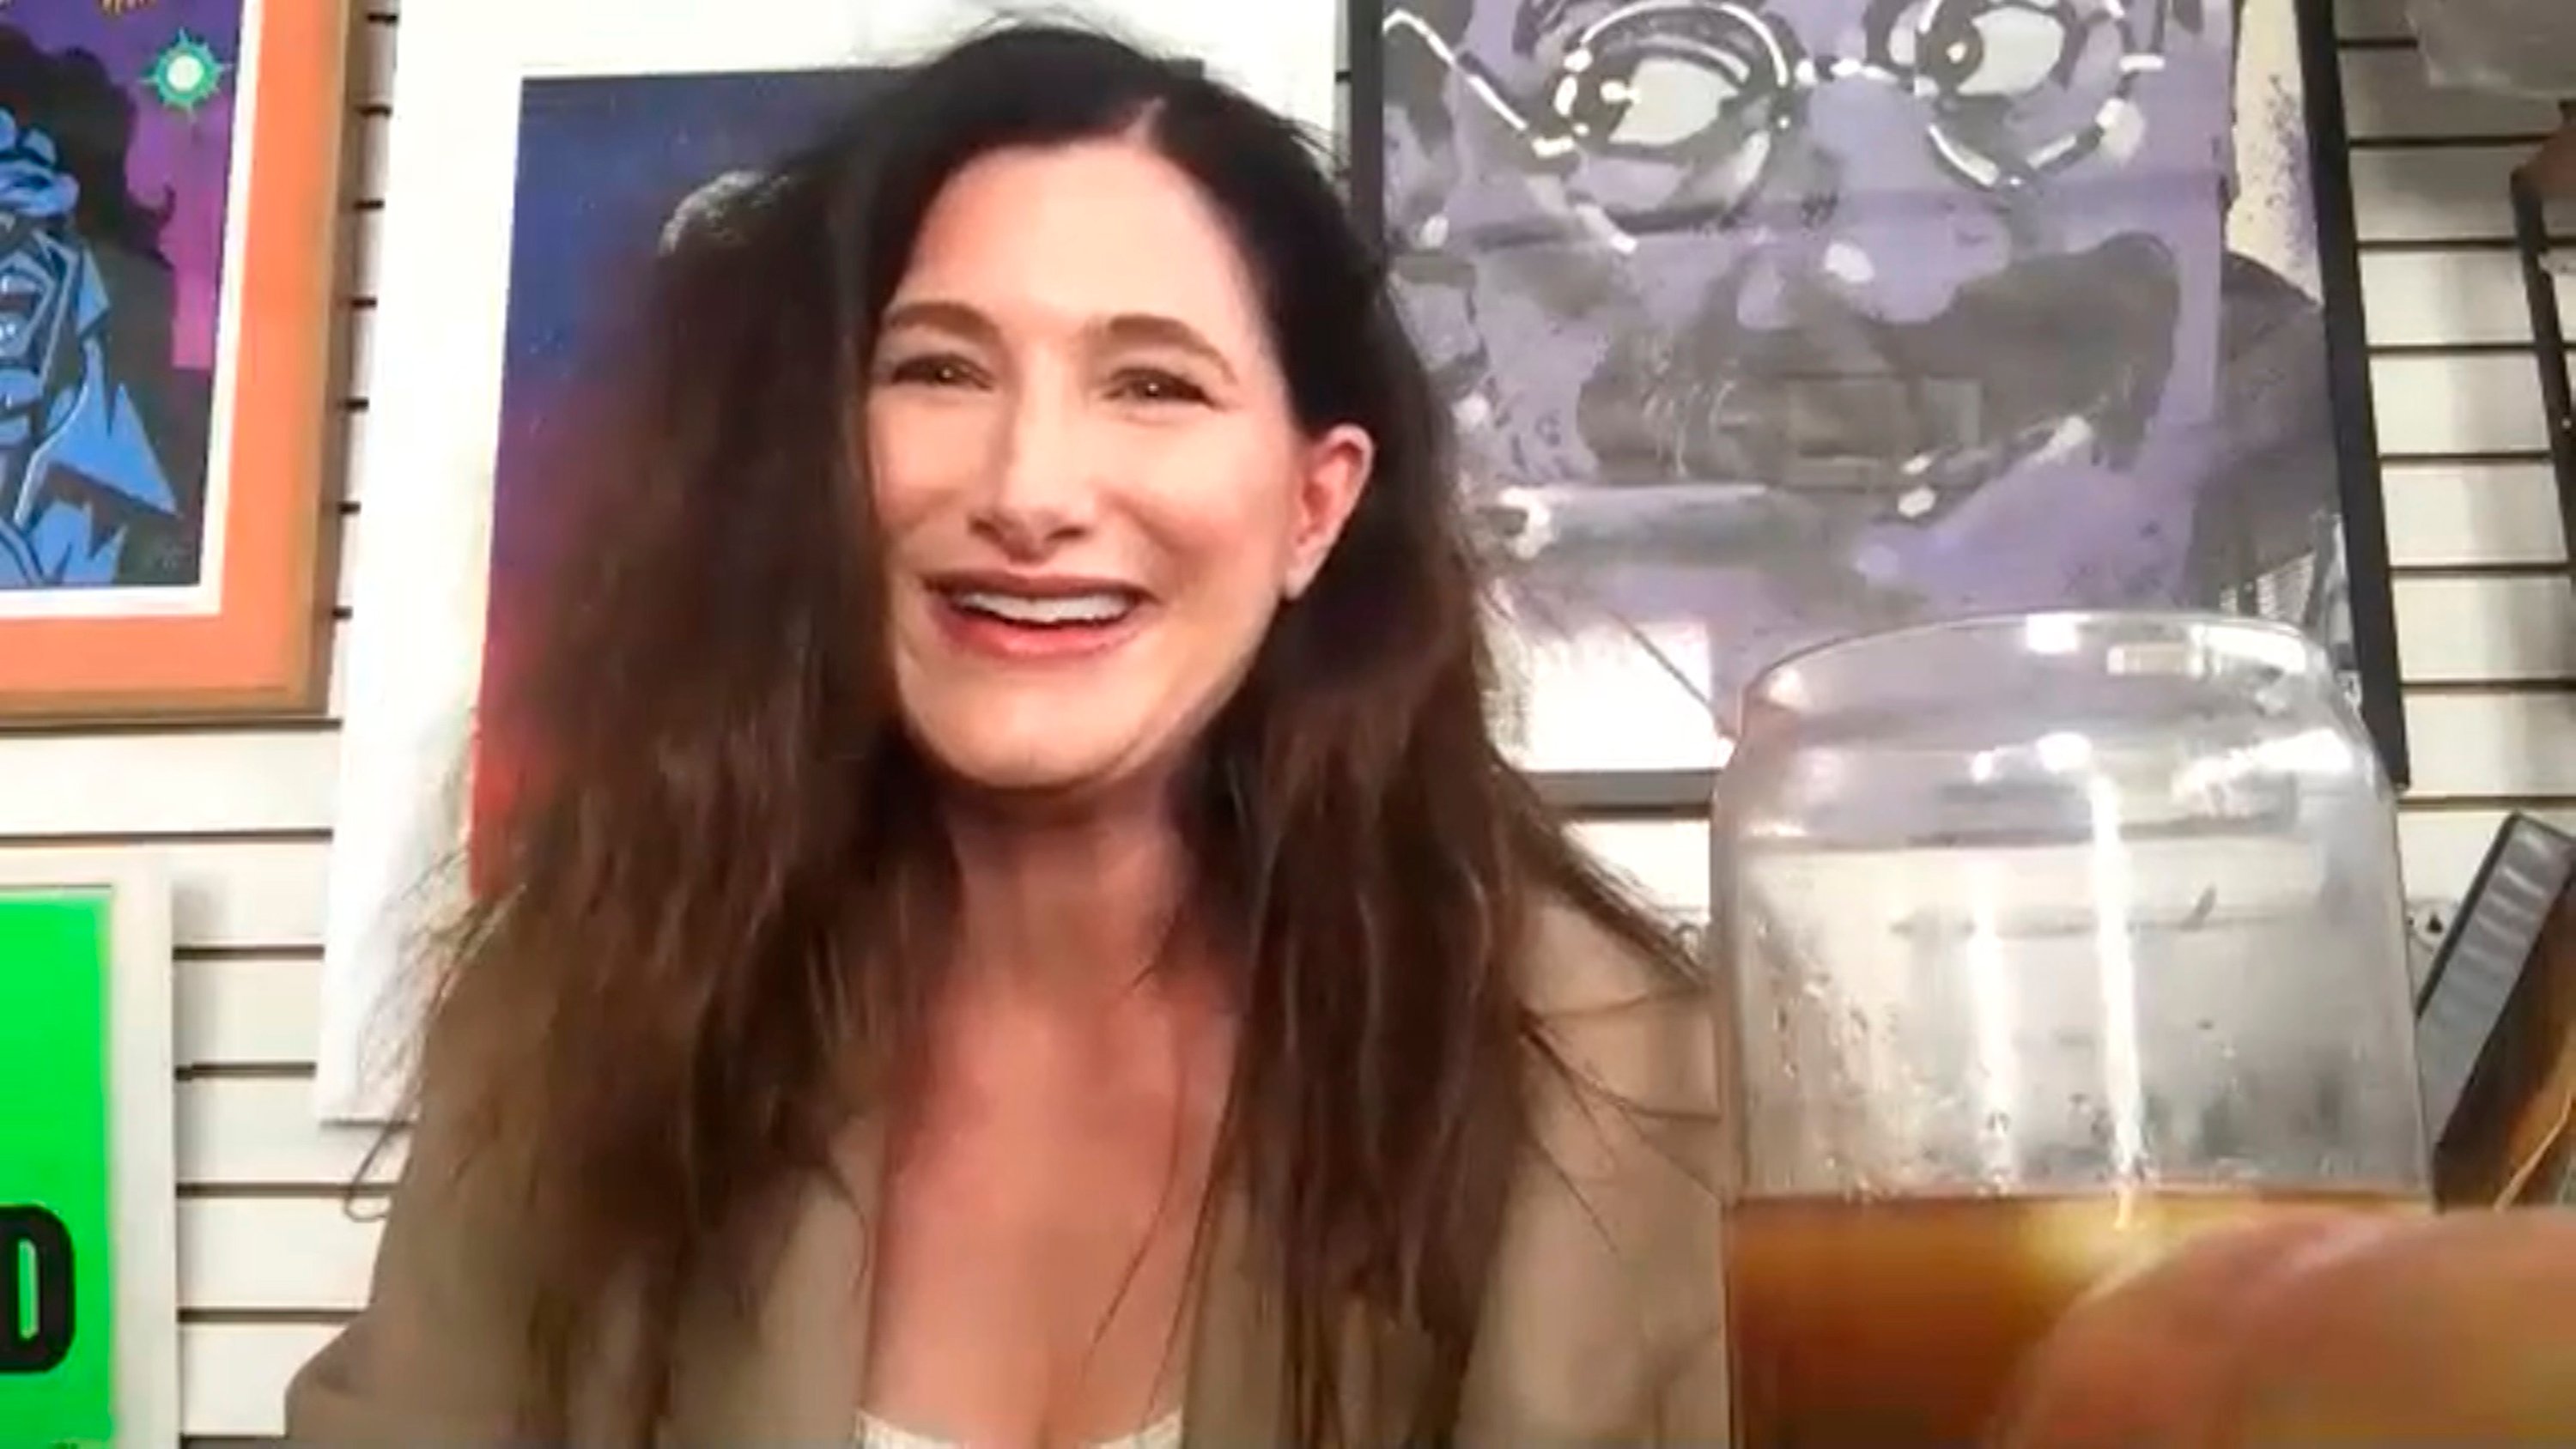 Kathryn Hahn in a Zoom interview with paintings behind her 